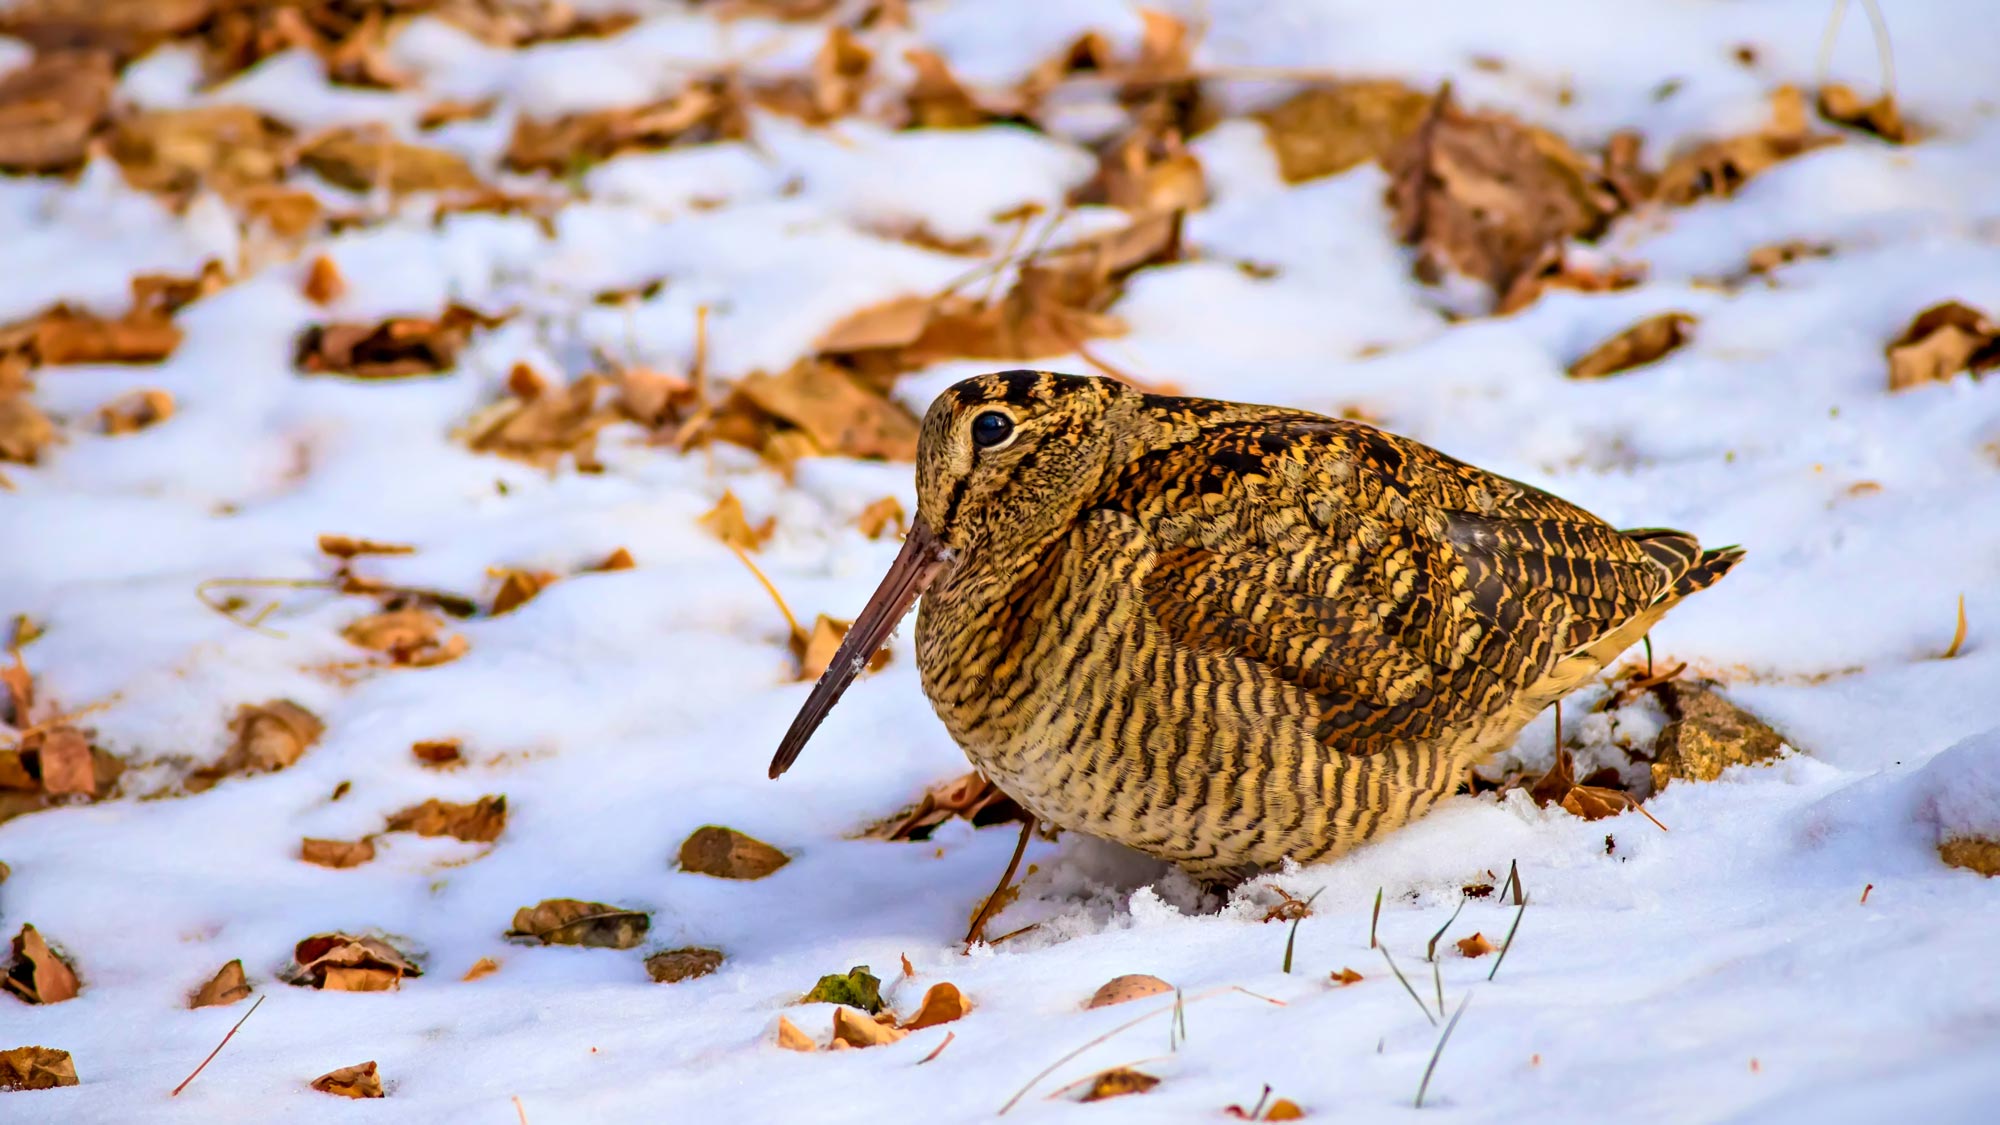 A woodcock on the snowy ground.